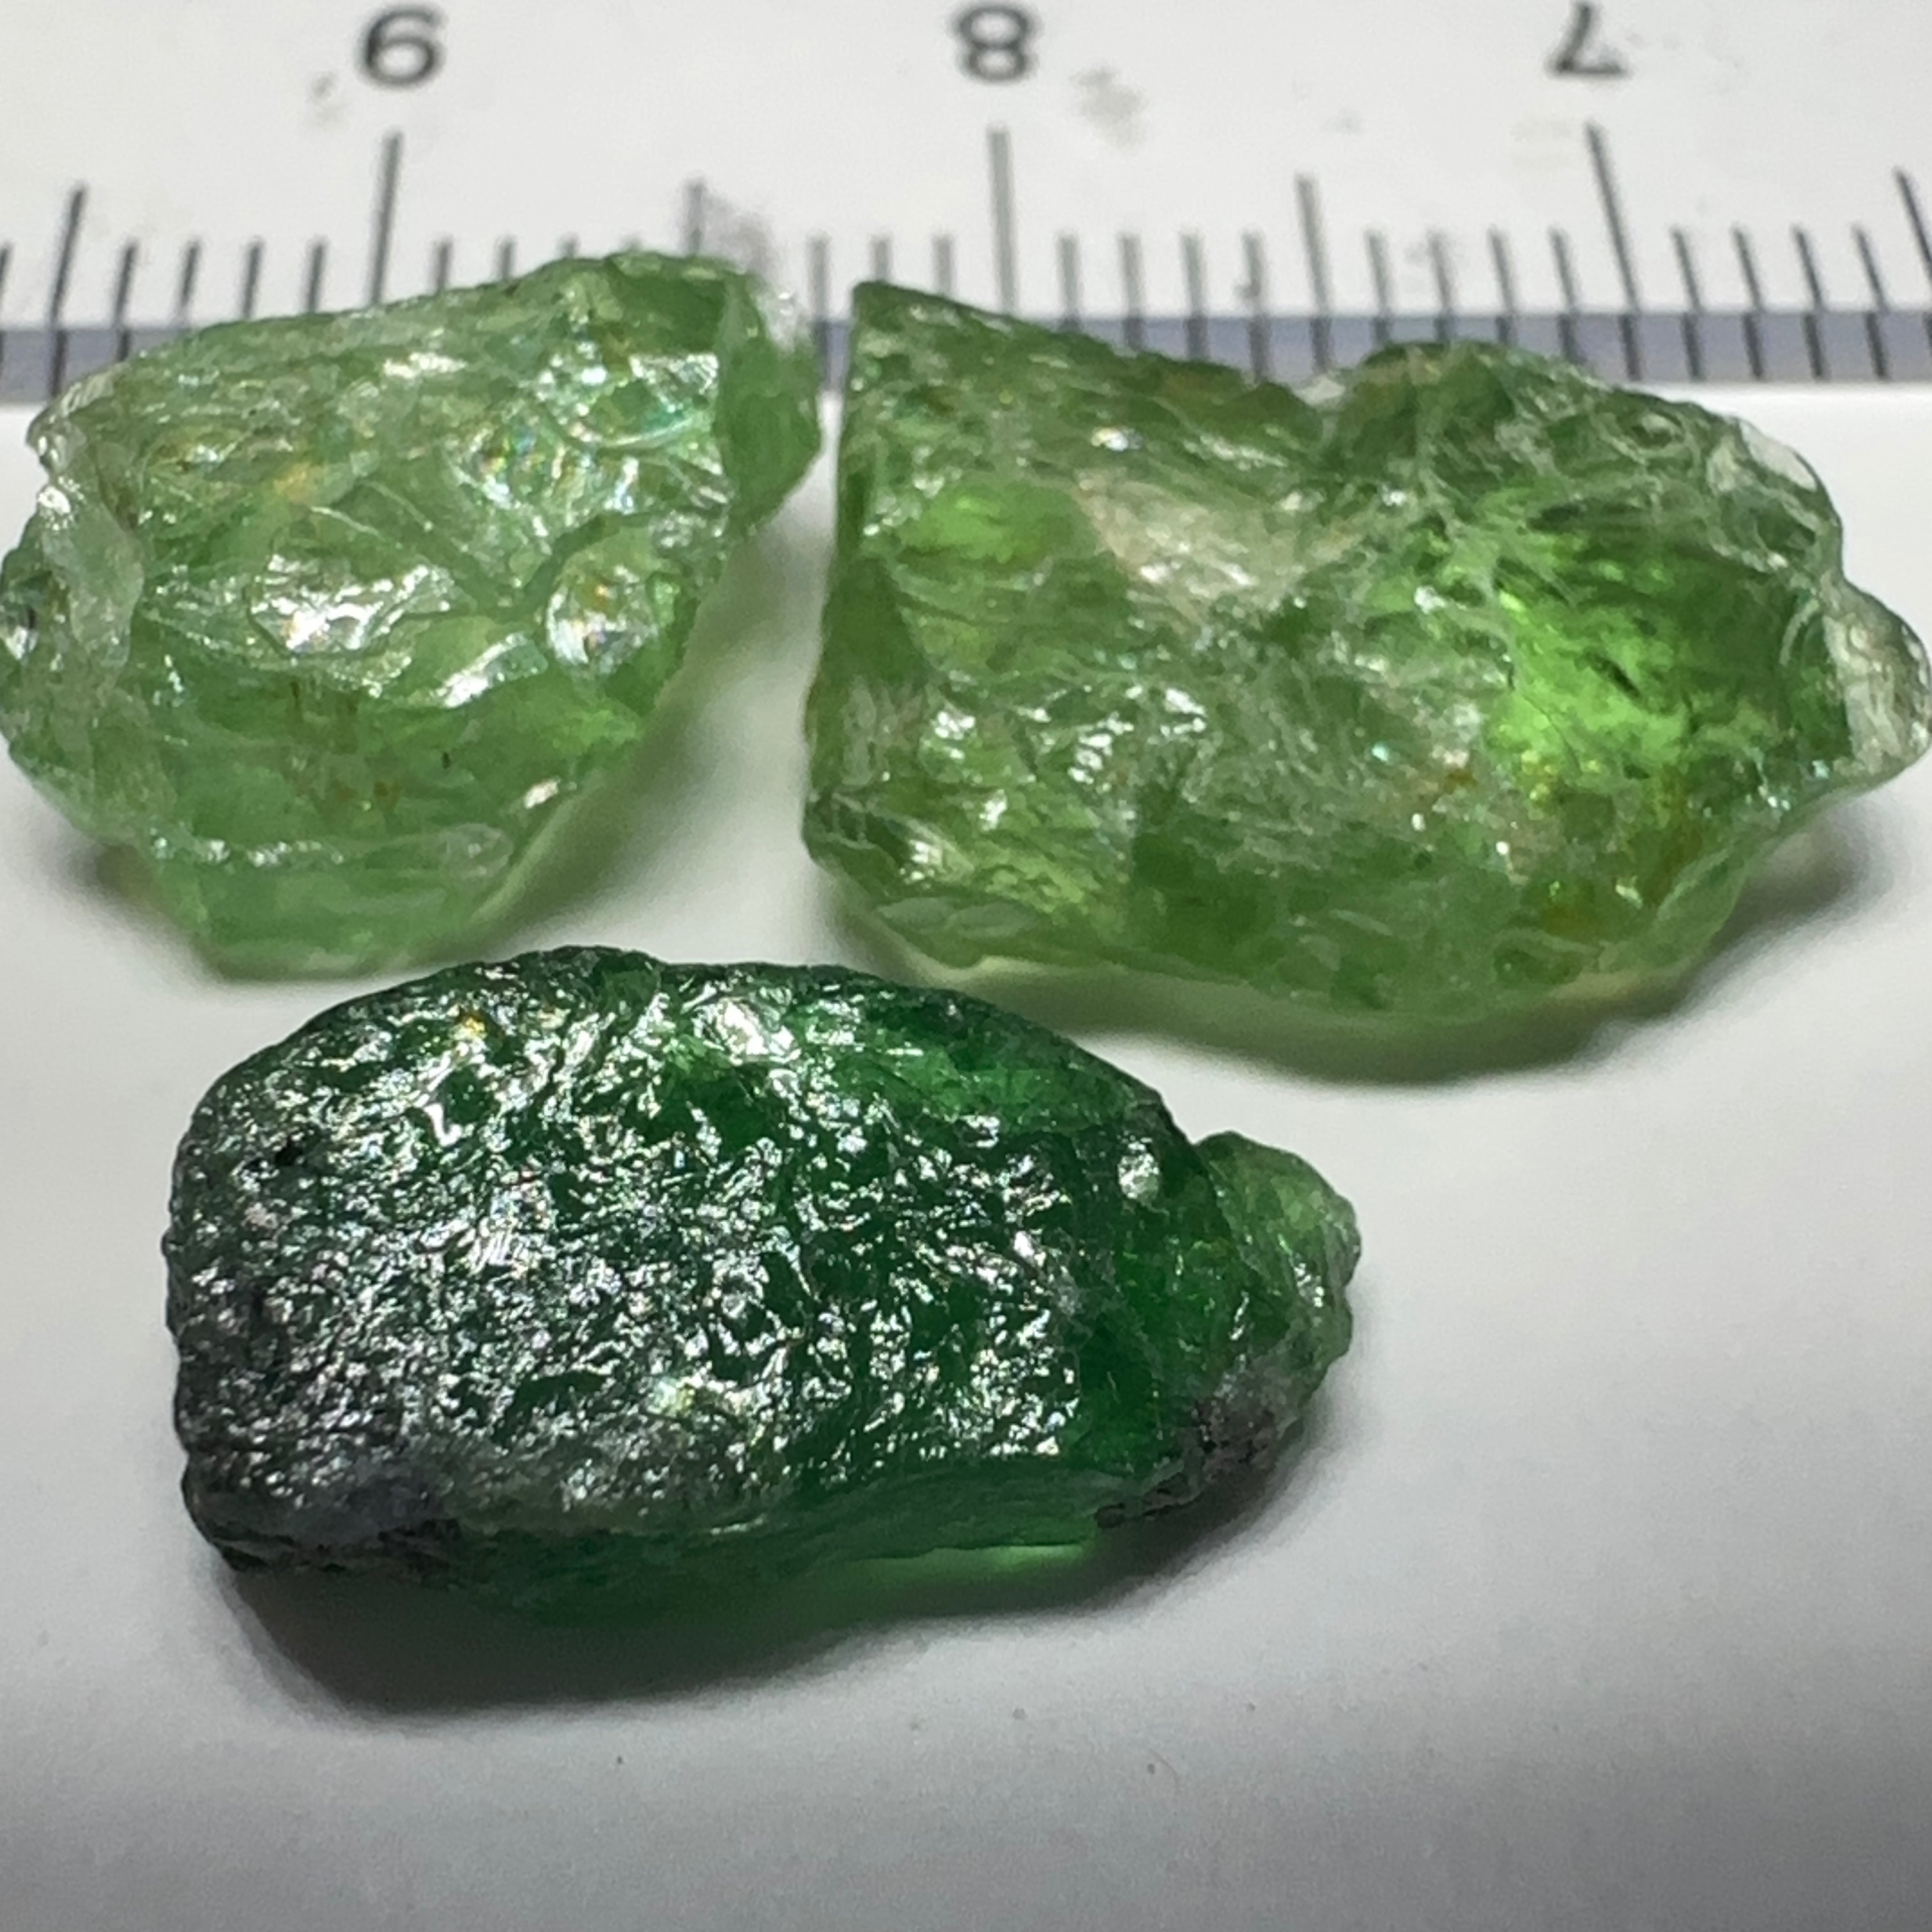 16.91ct Tsavorite Garnet Lot, Tanzania. Untreated Unheated. 4.20ct - 7.03ct. All included but transparent, good for setting in jewellery as is